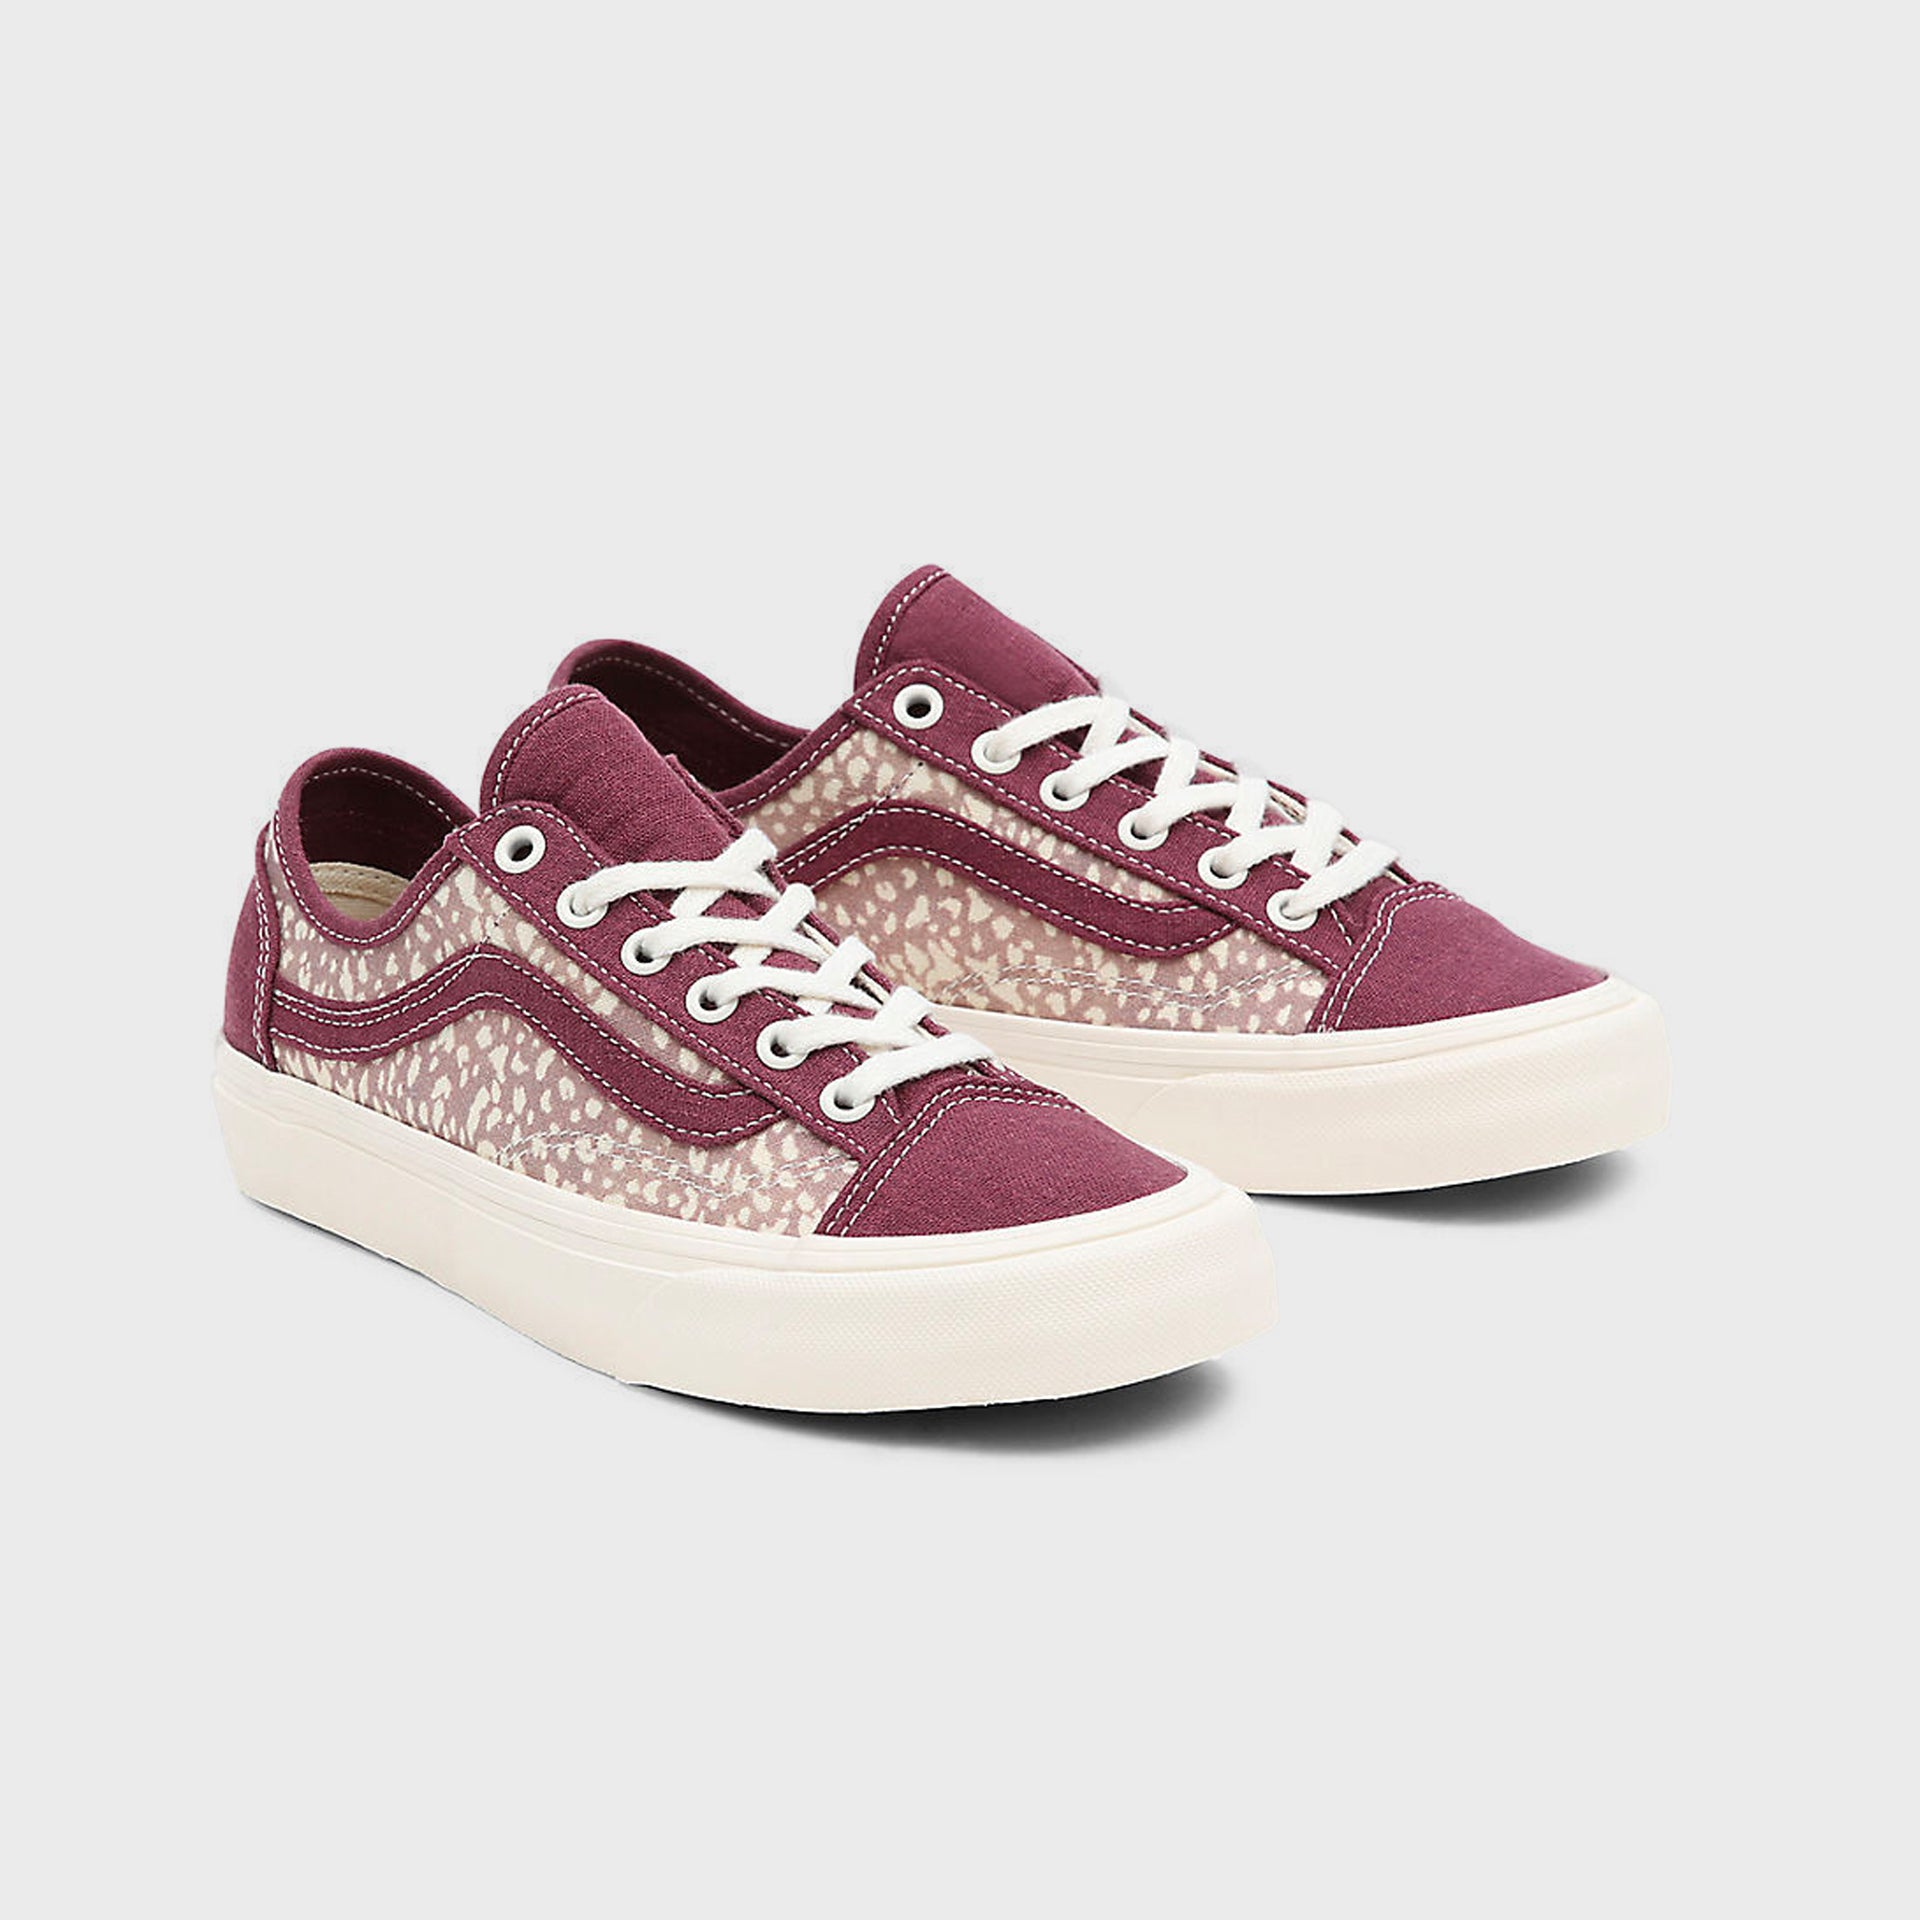 Vans Eco Theory Style 36 Decon SF Shoes - Animal/Mauve Wine - ManGo Surfing